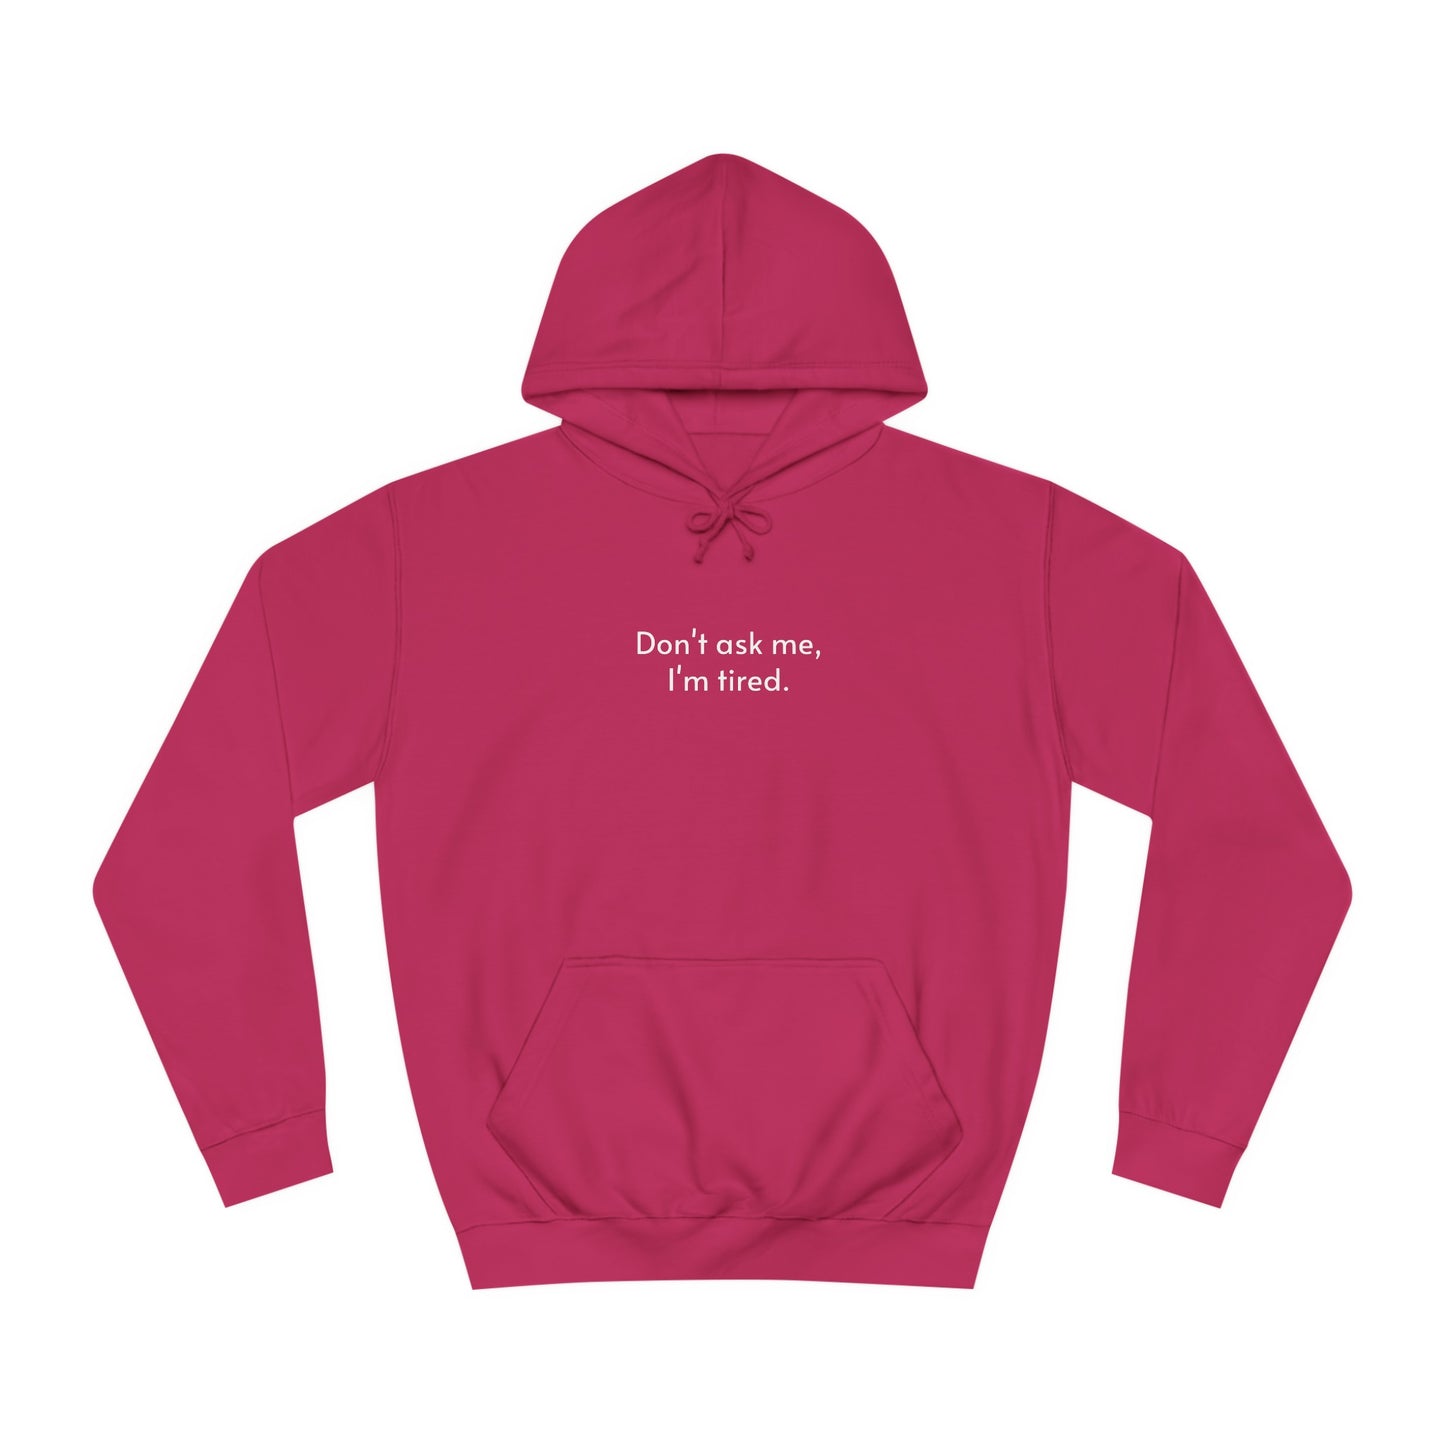 Don't ask me, I'm tired hoodie